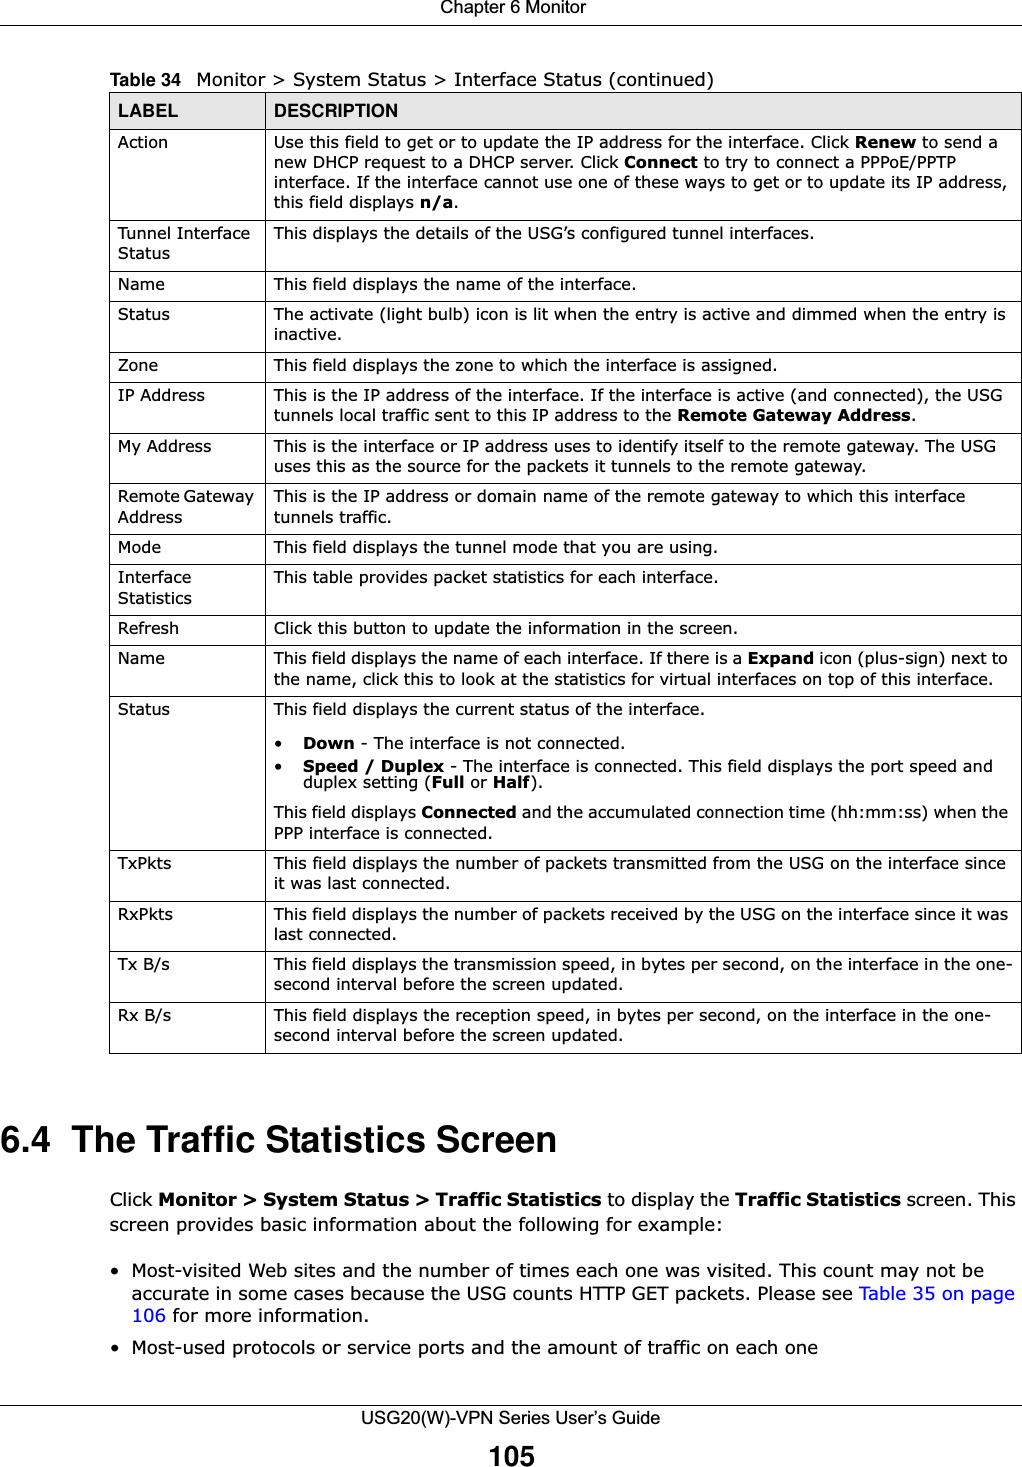  Chapter 6 MonitorUSG20(W)-VPN Series User’s Guide1056.4  The Traffic Statistics ScreenClick Monitor &gt; System Status &gt; Traffic Statistics to display the Traffic Statistics screen. This screen provides basic information about the following for example:• Most-visited Web sites and the number of times each one was visited. This count may not be accurate in some cases because the USG counts HTTP GET packets. Please see Table 35 on page 106 for more information.• Most-used protocols or service ports and the amount of traffic on each oneAction Use this field to get or to update the IP address for the interface. Click Renew to send a new DHCP request to a DHCP server. Click Connect to try to connect a PPPoE/PPTP interface. If the interface cannot use one of these ways to get or to update its IP address, this field displays n/a.Tunnel Interface StatusThis displays the details of the USG’s configured tunnel interfaces.Name This field displays the name of the interface.Status The activate (light bulb) icon is lit when the entry is active and dimmed when the entry is inactive.Zone This field displays the zone to which the interface is assigned.IP Address This is the IP address of the interface. If the interface is active (and connected), the USG tunnels local traffic sent to this IP address to the Remote Gateway Address.My Address This is the interface or IP address uses to identify itself to the remote gateway. The USG uses this as the source for the packets it tunnels to the remote gateway.Remote Gateway AddressThis is the IP address or domain name of the remote gateway to which this interface tunnels traffic.Mode  This field displays the tunnel mode that you are using.Interface StatisticsThis table provides packet statistics for each interface.Refresh Click this button to update the information in the screen.Name This field displays the name of each interface. If there is a Expand icon (plus-sign) next to the name, click this to look at the statistics for virtual interfaces on top of this interface.Status This field displays the current status of the interface. •Down - The interface is not connected.•Speed / Duplex - The interface is connected. This field displays the port speed and duplex setting (Full or Half).This field displays Connected and the accumulated connection time (hh:mm:ss) when the PPP interface is connected.TxPkts This field displays the number of packets transmitted from the USG on the interface since it was last connected.RxPkts This field displays the number of packets received by the USG on the interface since it was last connected.Tx B/s This field displays the transmission speed, in bytes per second, on the interface in the one-second interval before the screen updated.Rx B/s This field displays the reception speed, in bytes per second, on the interface in the one-second interval before the screen updated.Table 34   Monitor &gt; System Status &gt; Interface Status (continued)LABEL DESCRIPTION